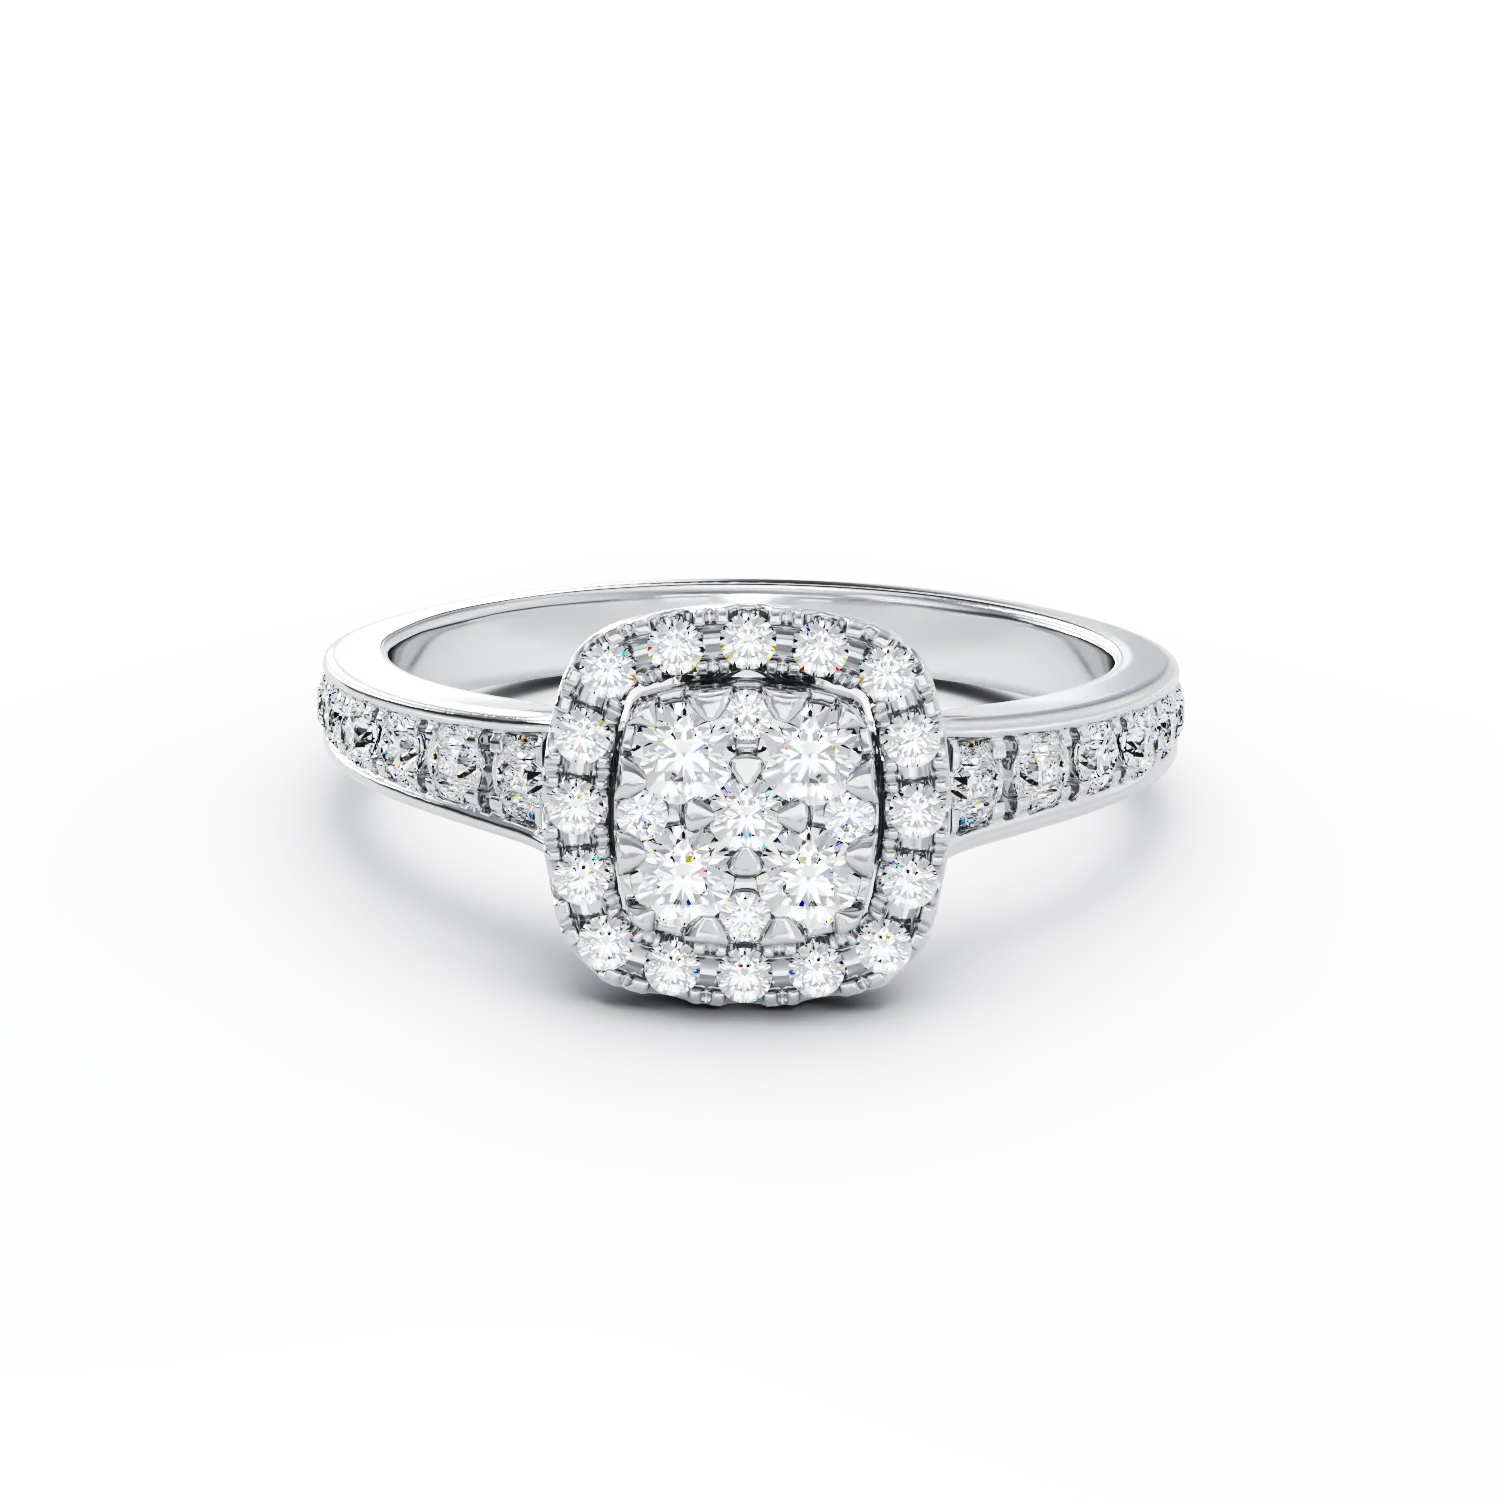 18K white gold engagement ring with 0.52ct diamonds